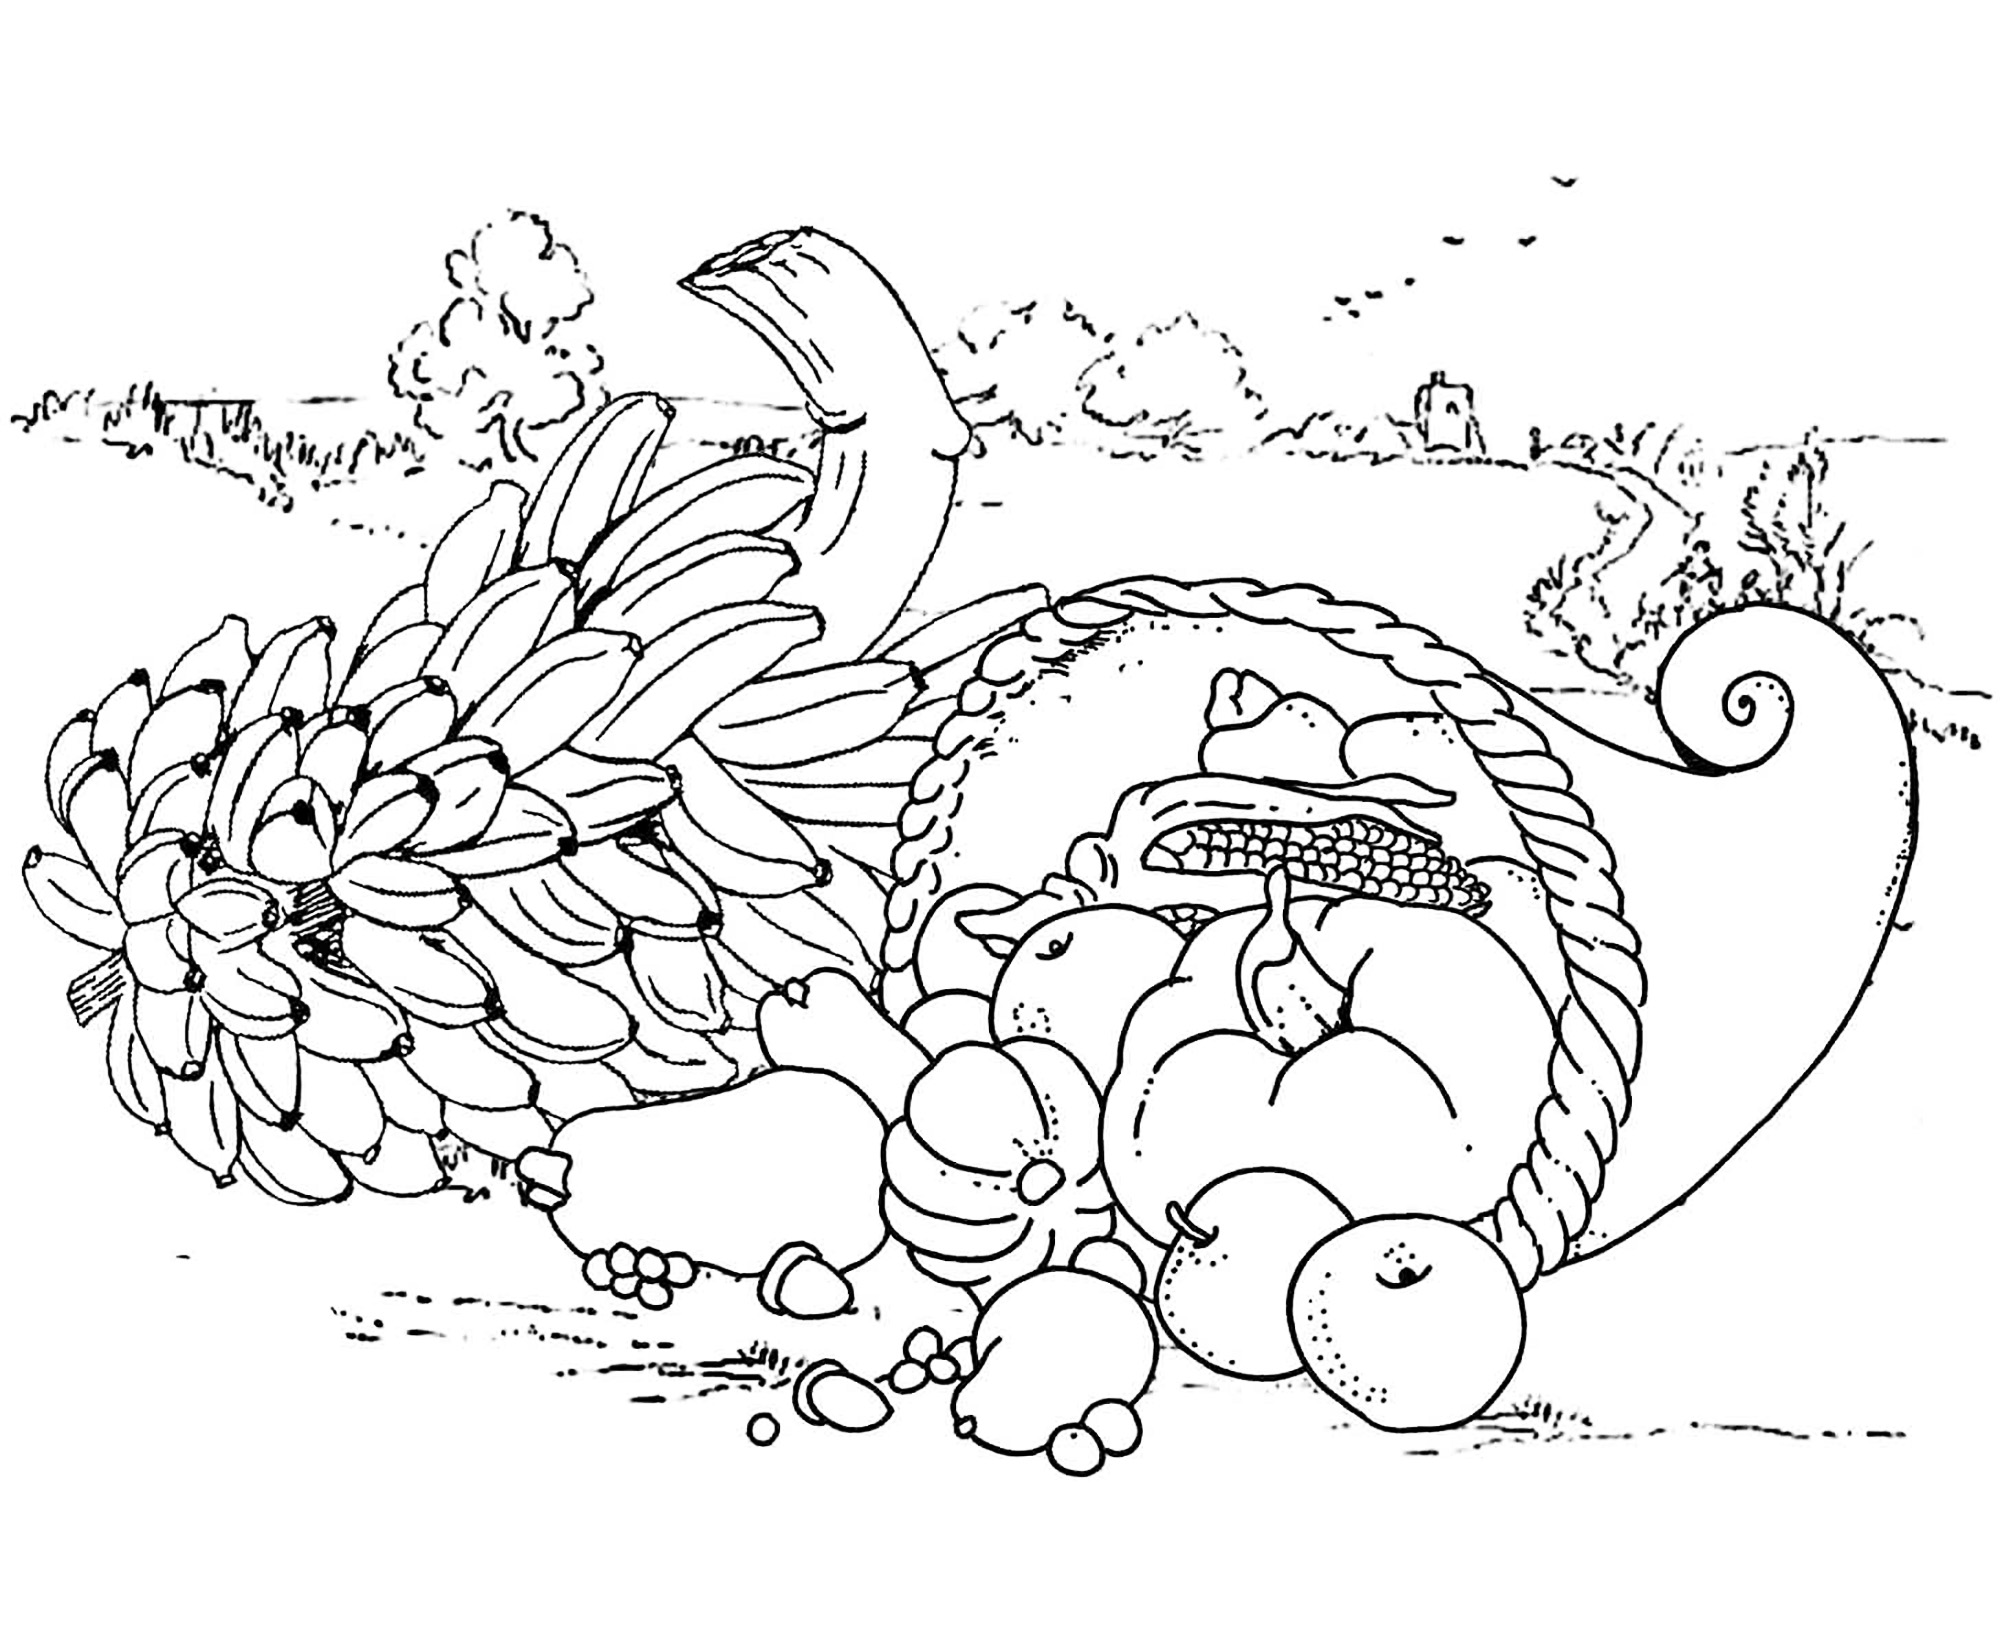 The Best Free Dementia Coloring Page Images Download From 19 Free